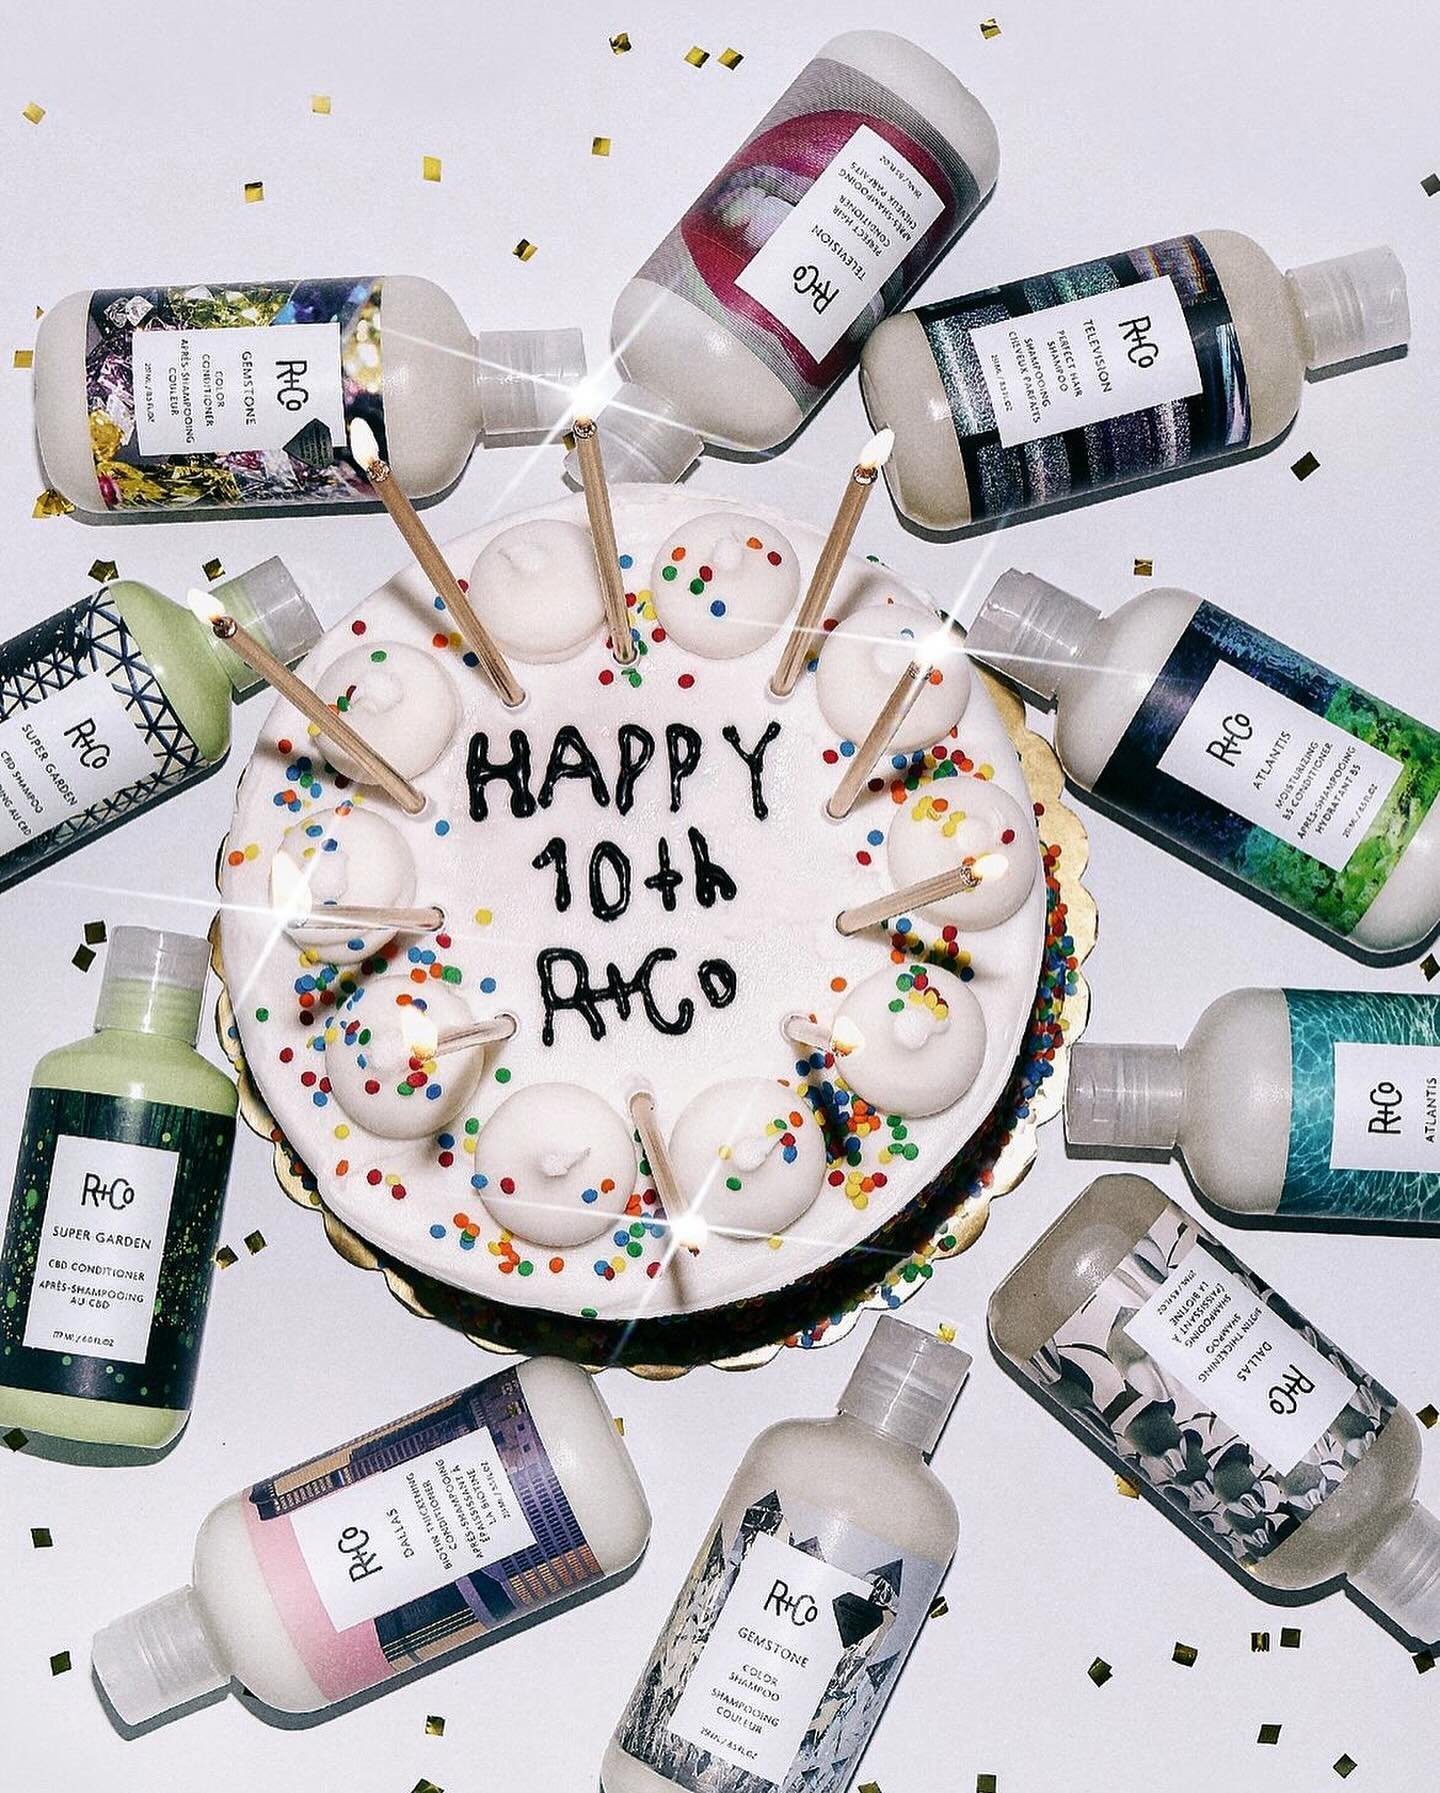 Get 30% off now on any R+Co products this includes BLEU their luxury line. Use CELEBRATE at checkout! 
Link :
https://www.randco.com/?rfsn=3922797.59e0812